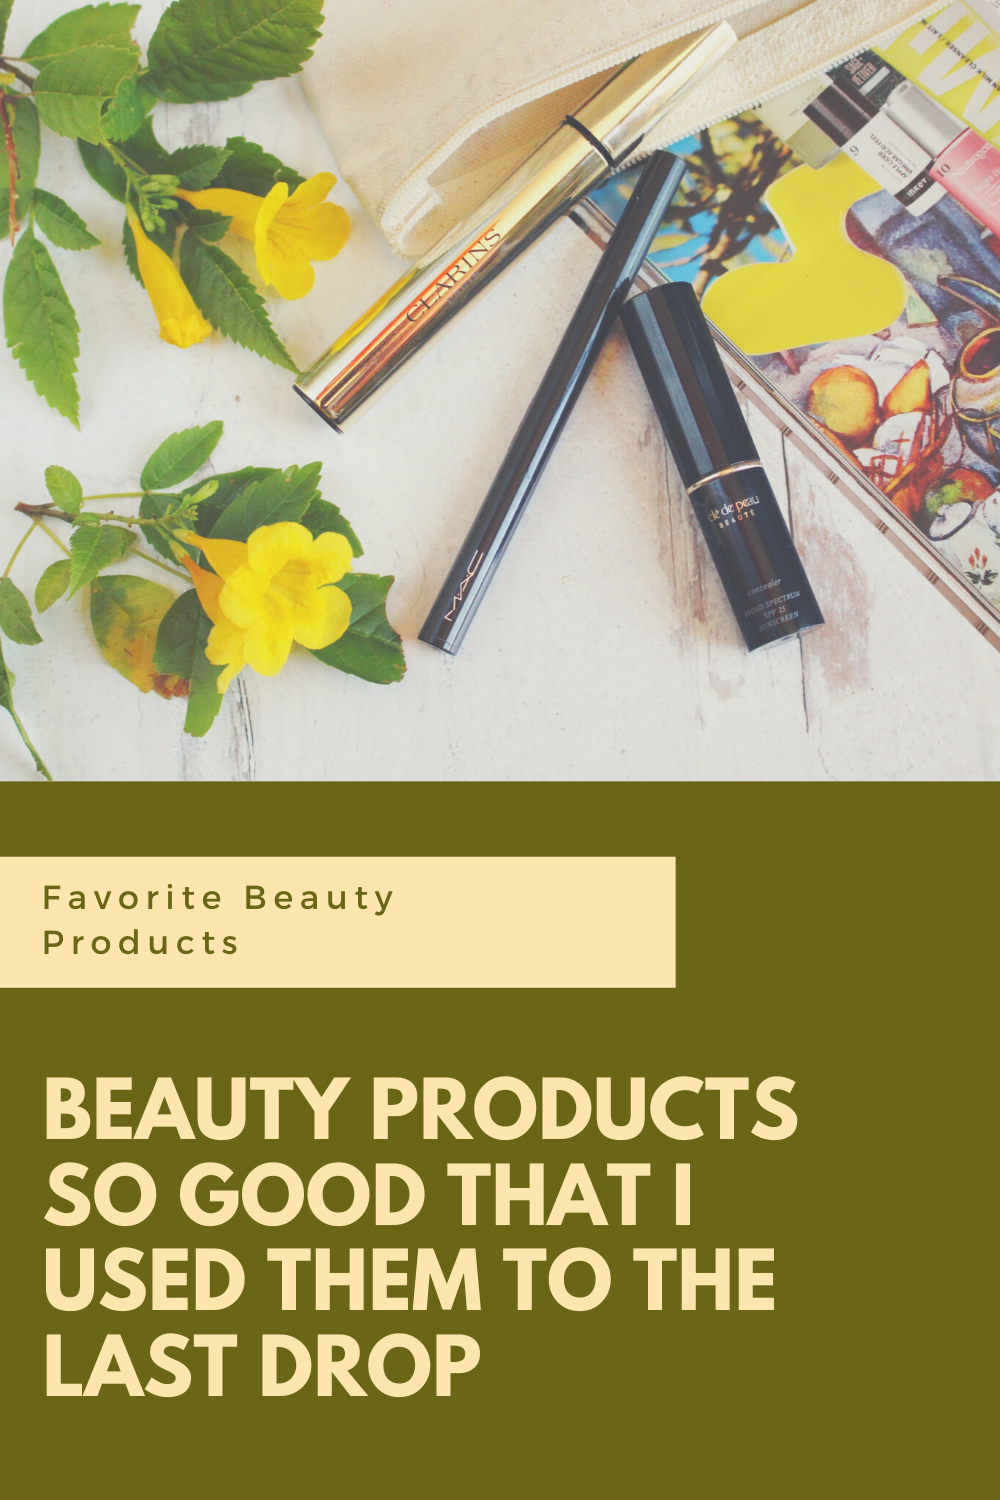 Favorite Beauty products